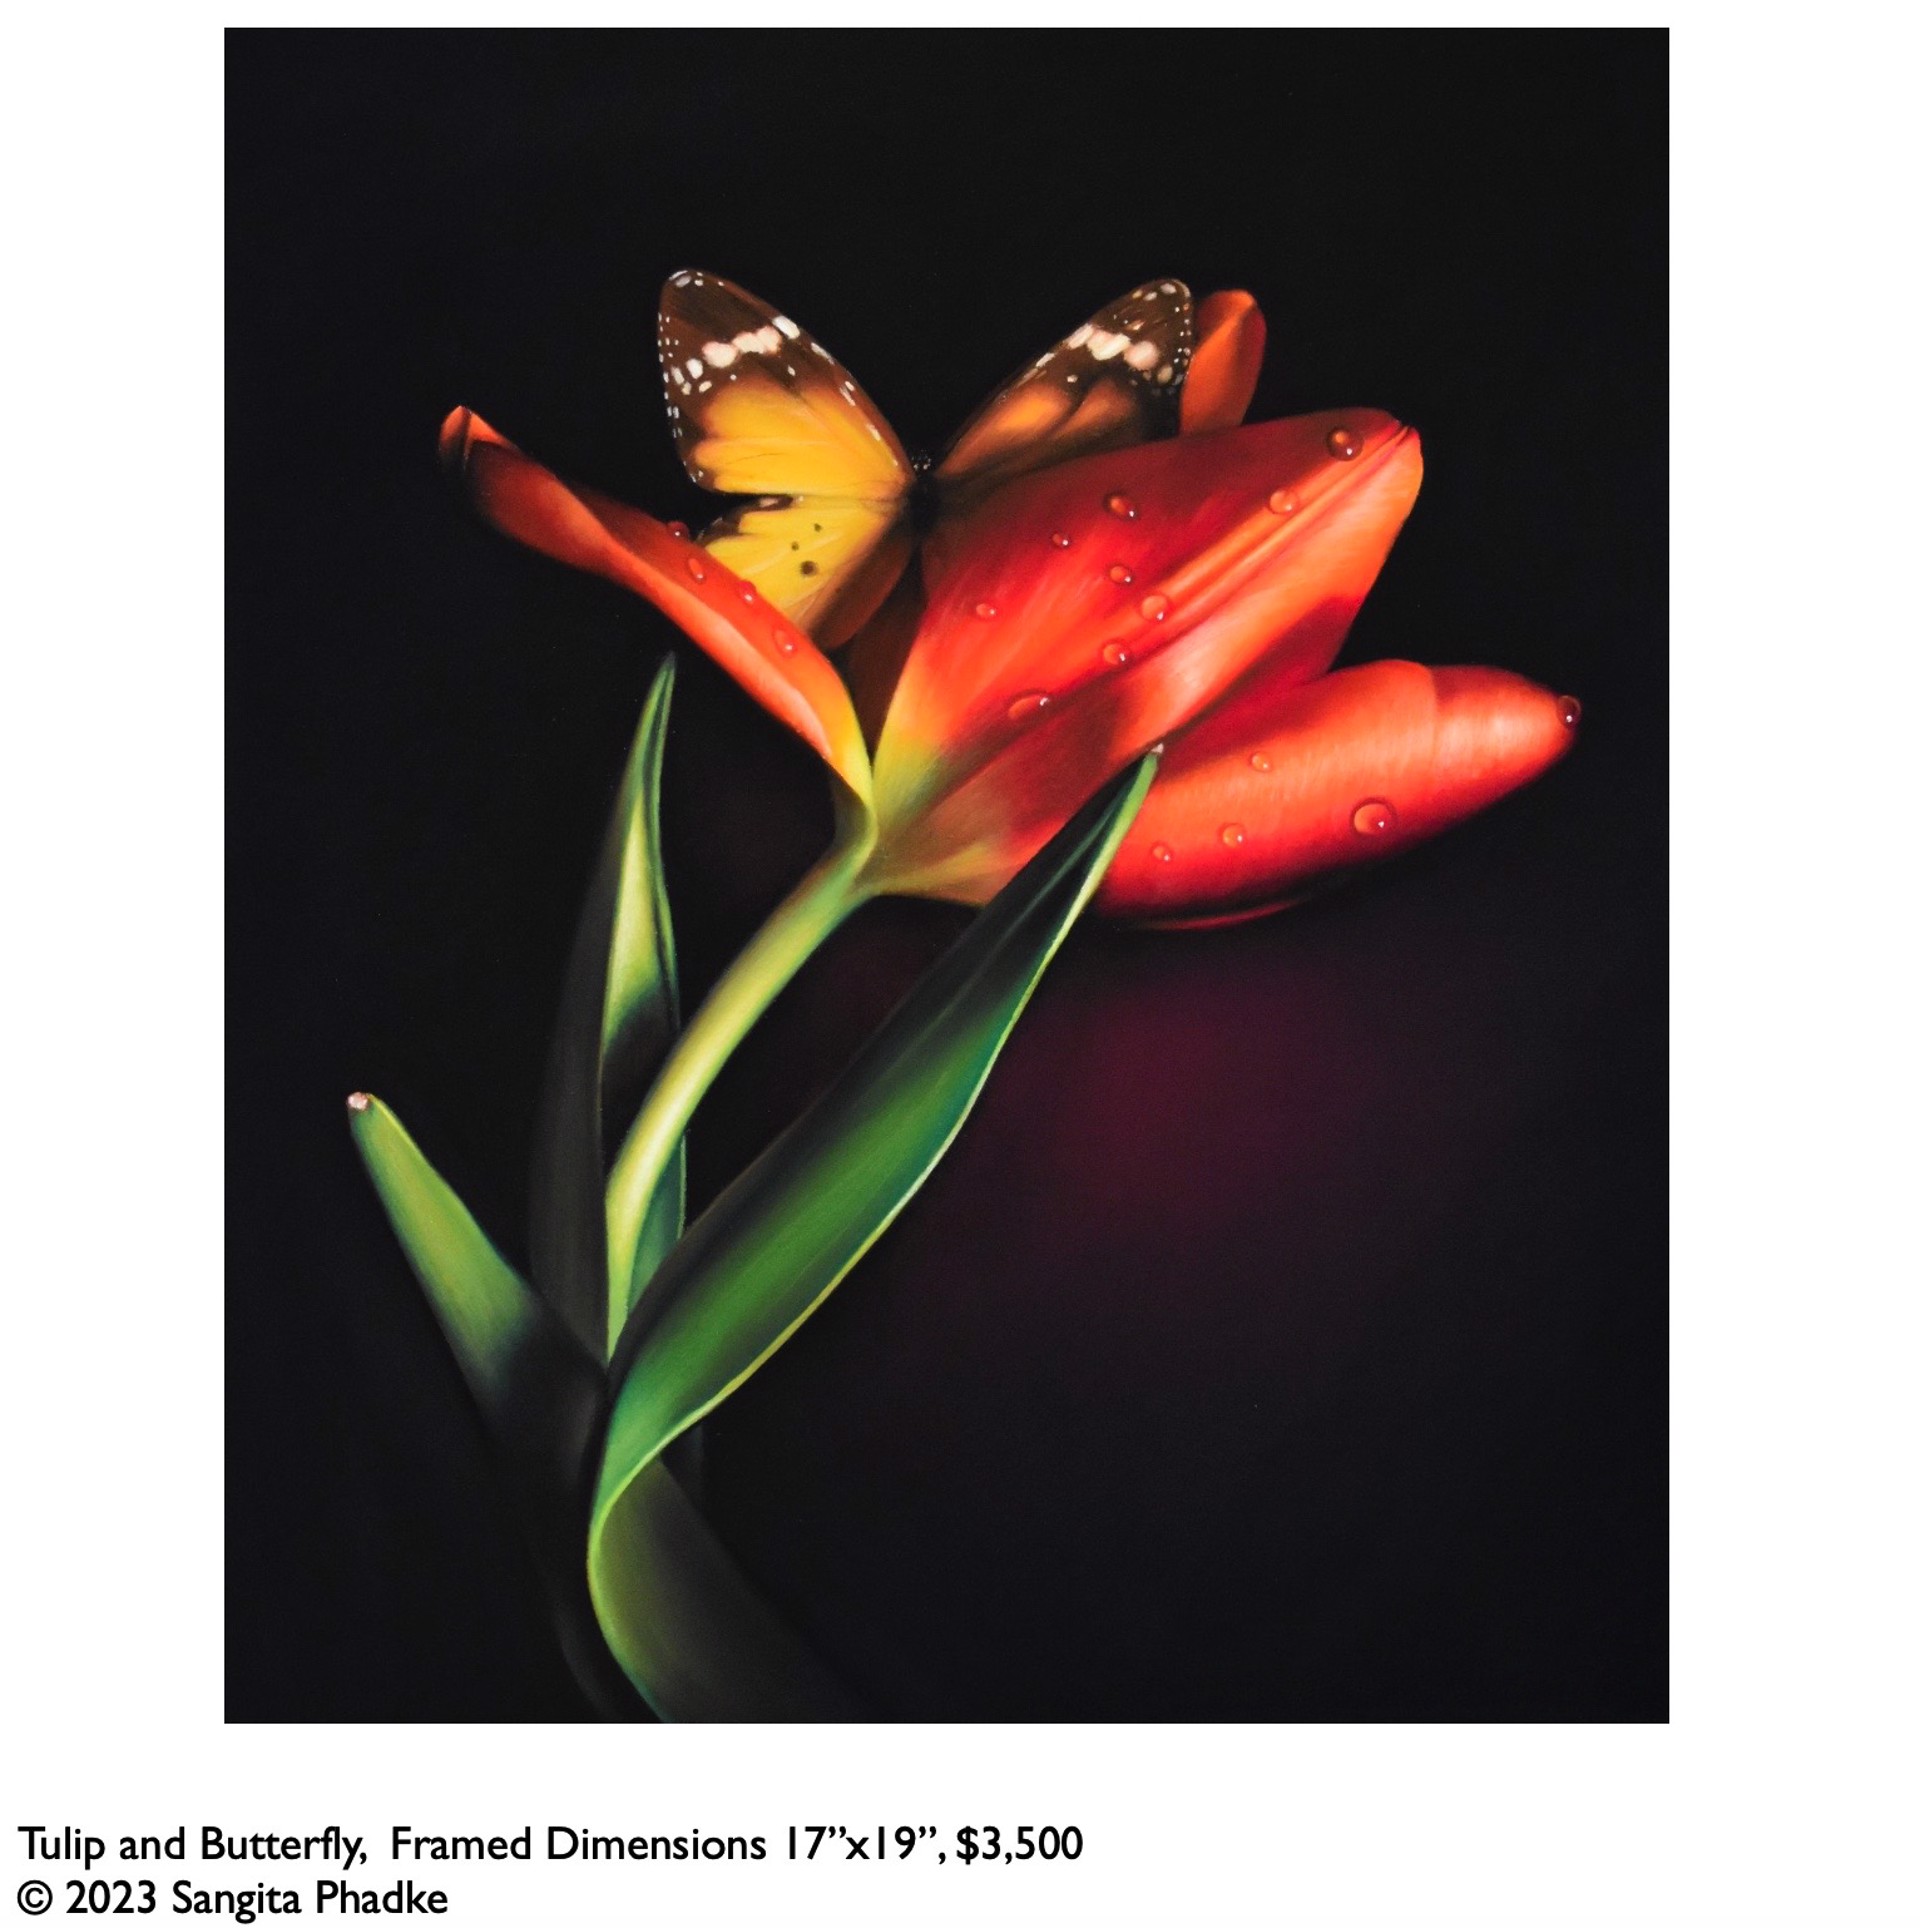 Tulip and Butterfly (19" x 17" Framed Dimensions) by Sangita Phadke